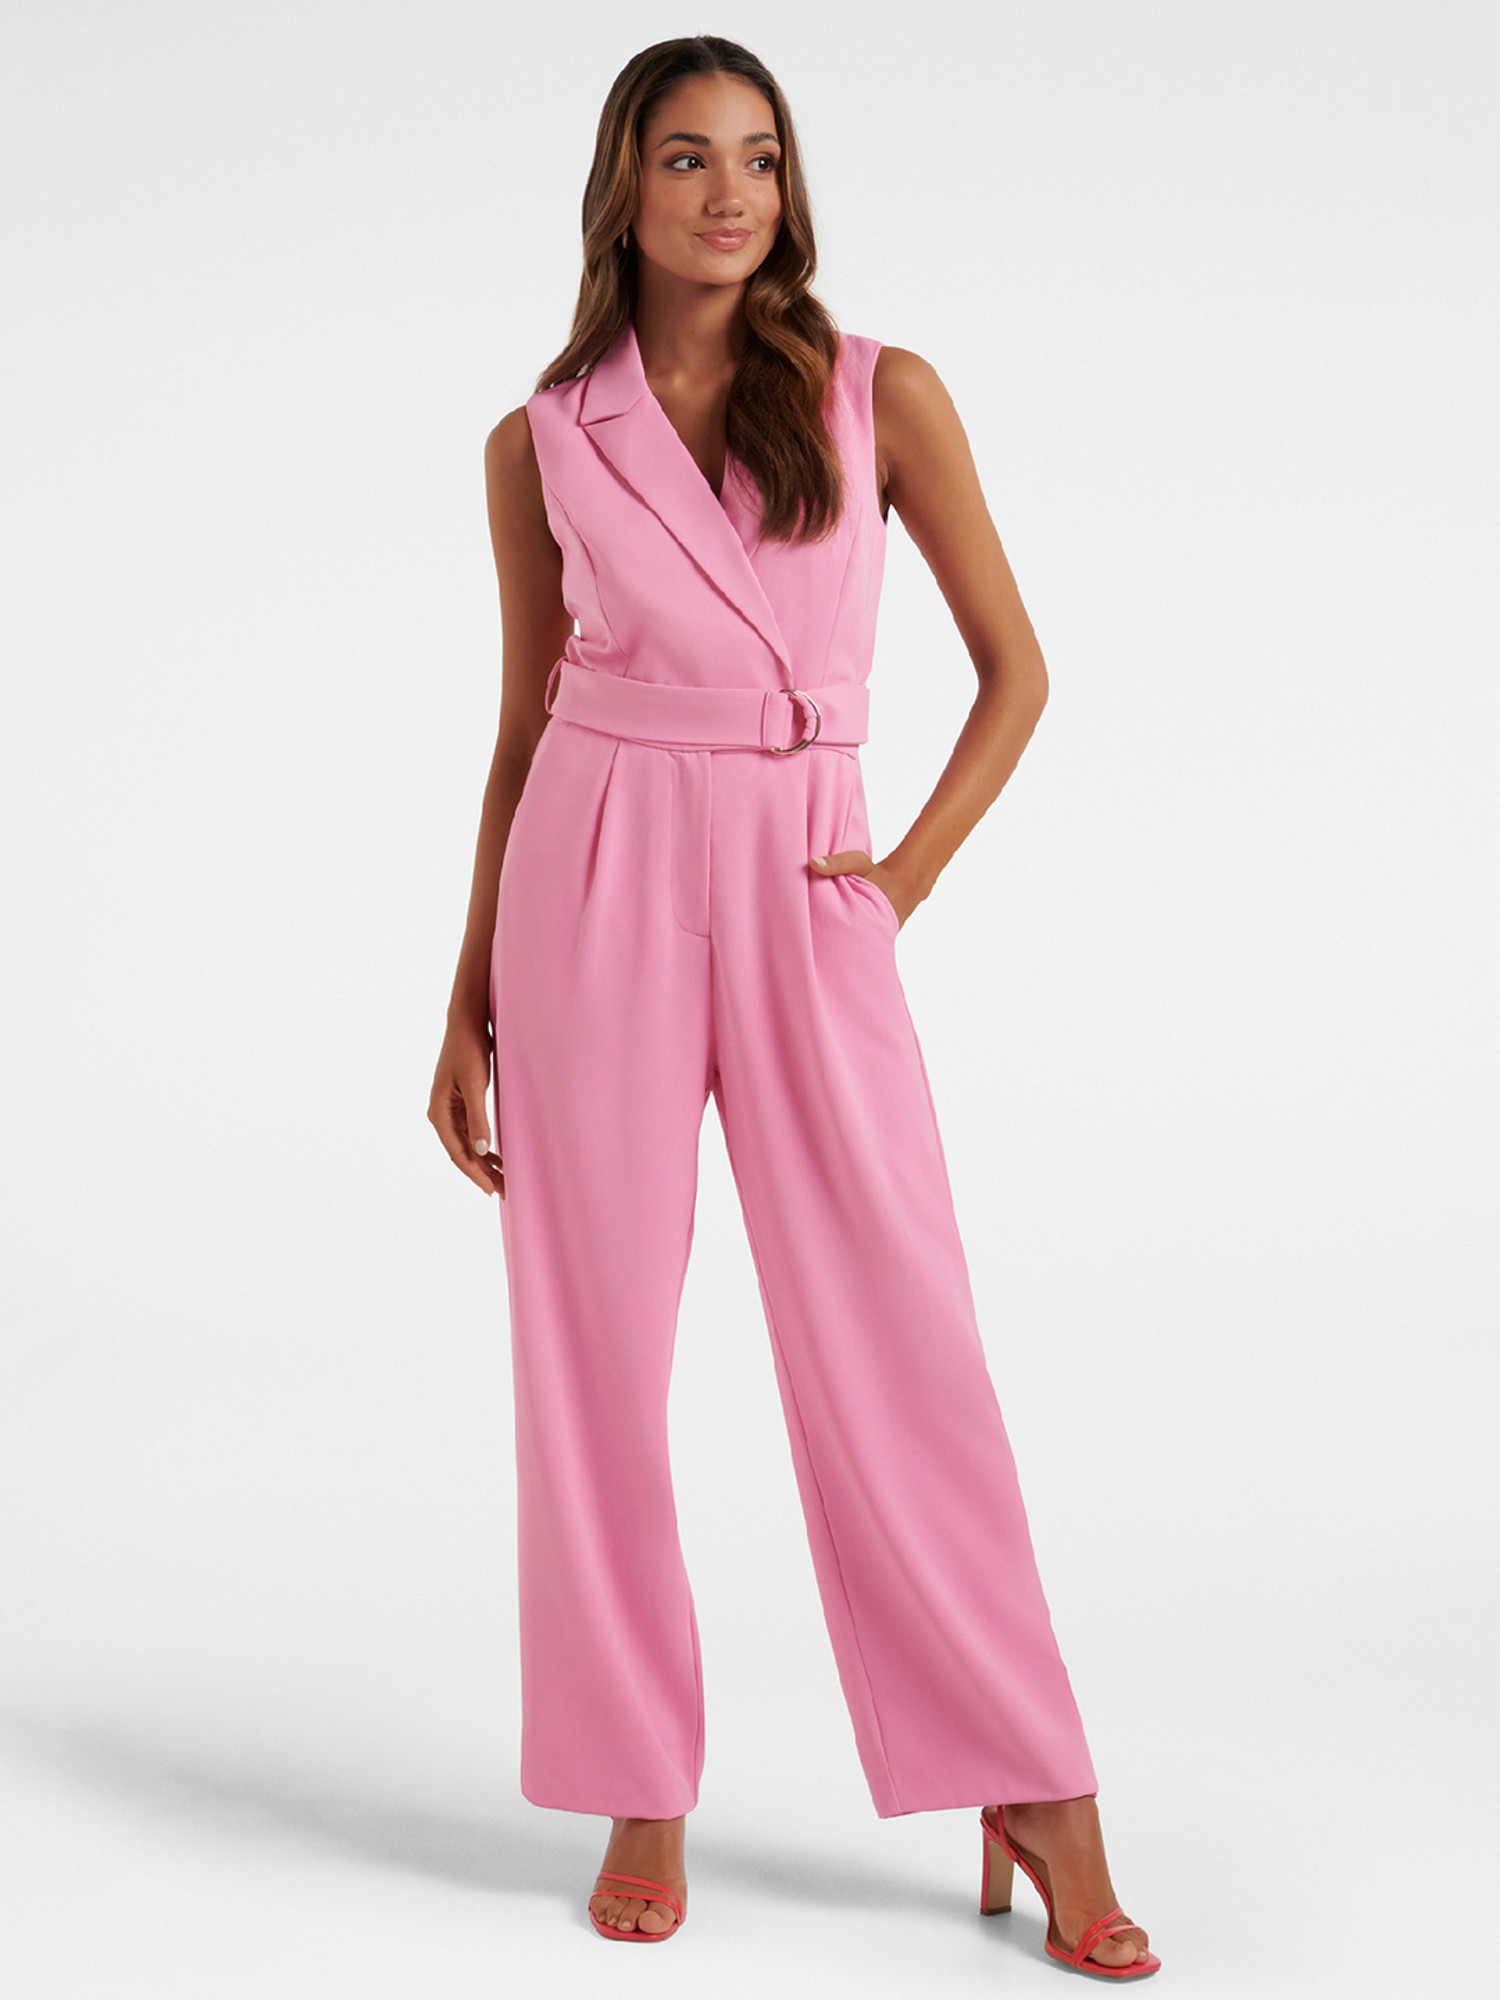 Buy Tandul Women's Dress – Pink Colour Jumpsuit Design - Sleeveless,  Fitting belt Boost Your Style with Casual Dress for Women & Girls Easy Wash  Without Fading Colour Size-Small gifts for women